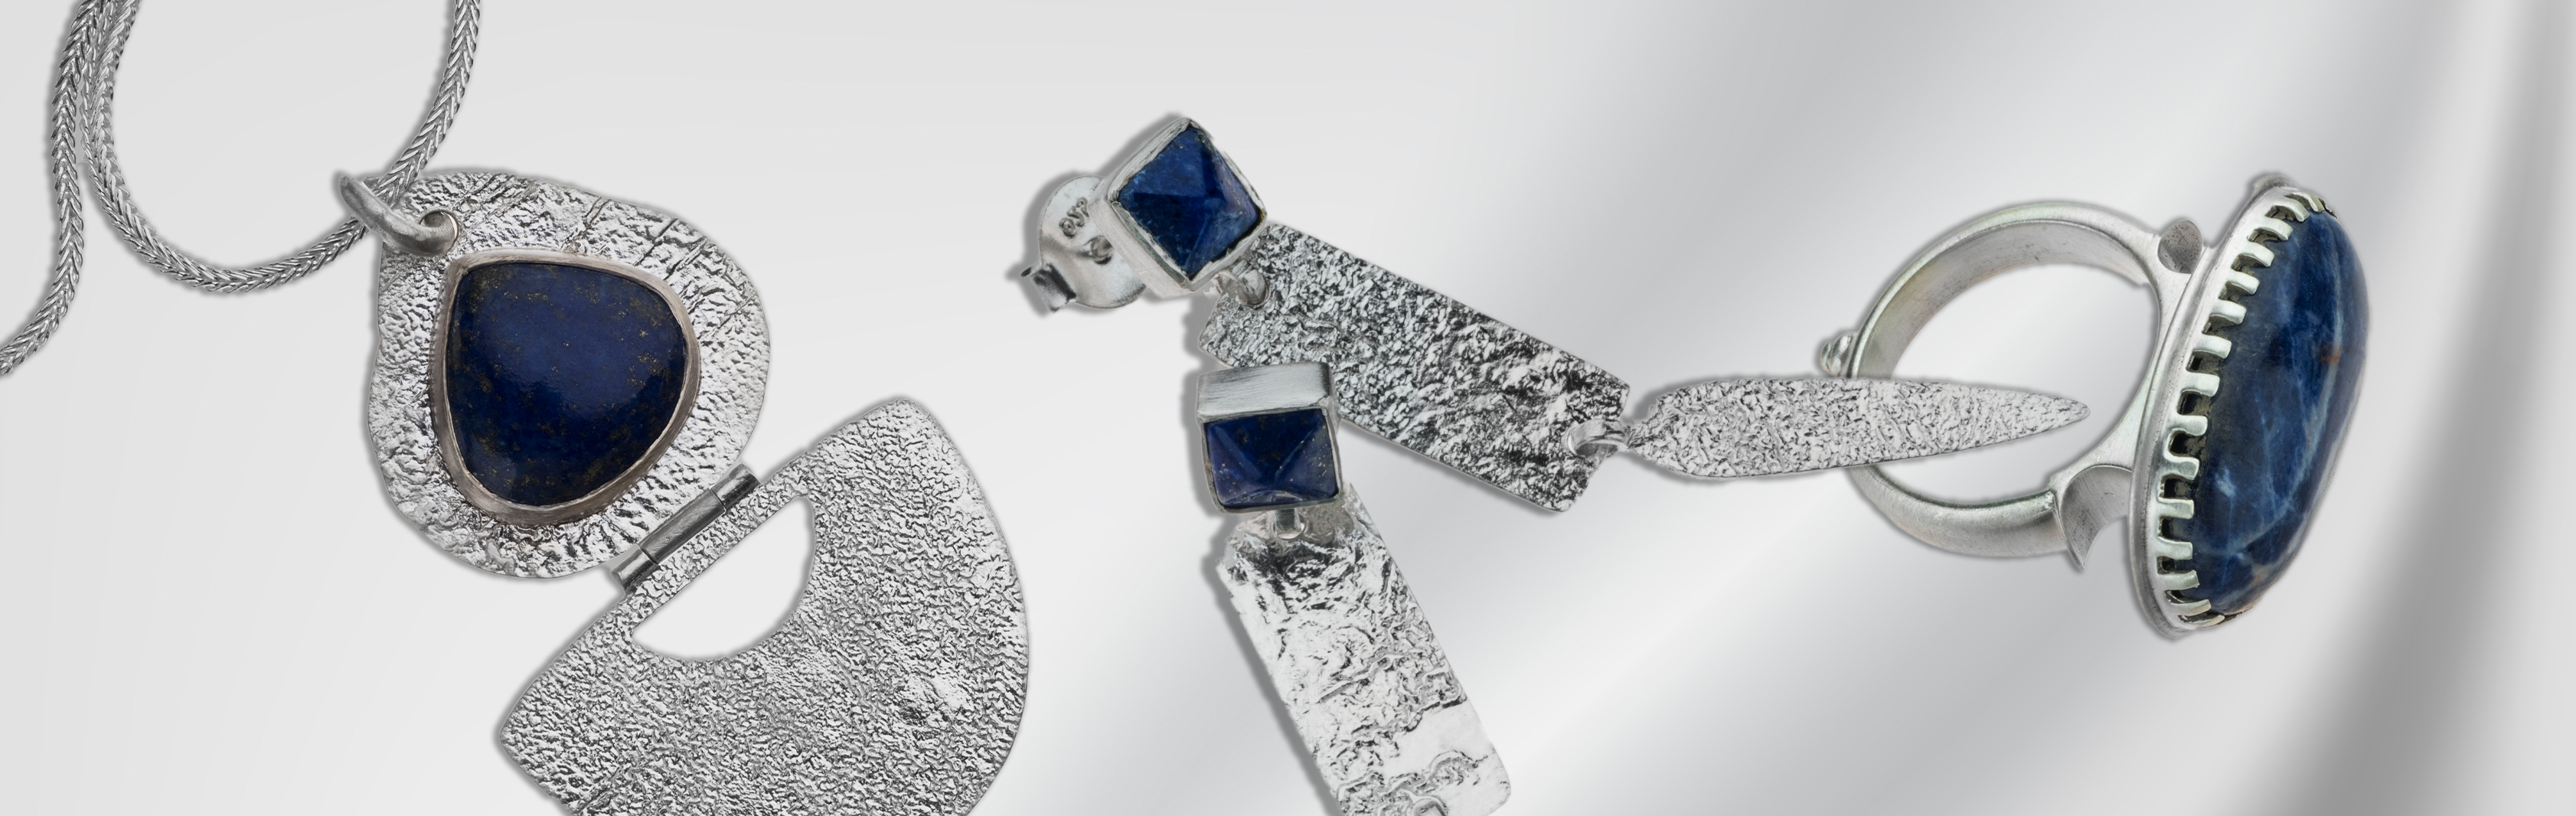 Veronica Collection | 925 Sterling Silver Jewelry with Lapis Lazuli Sodalite